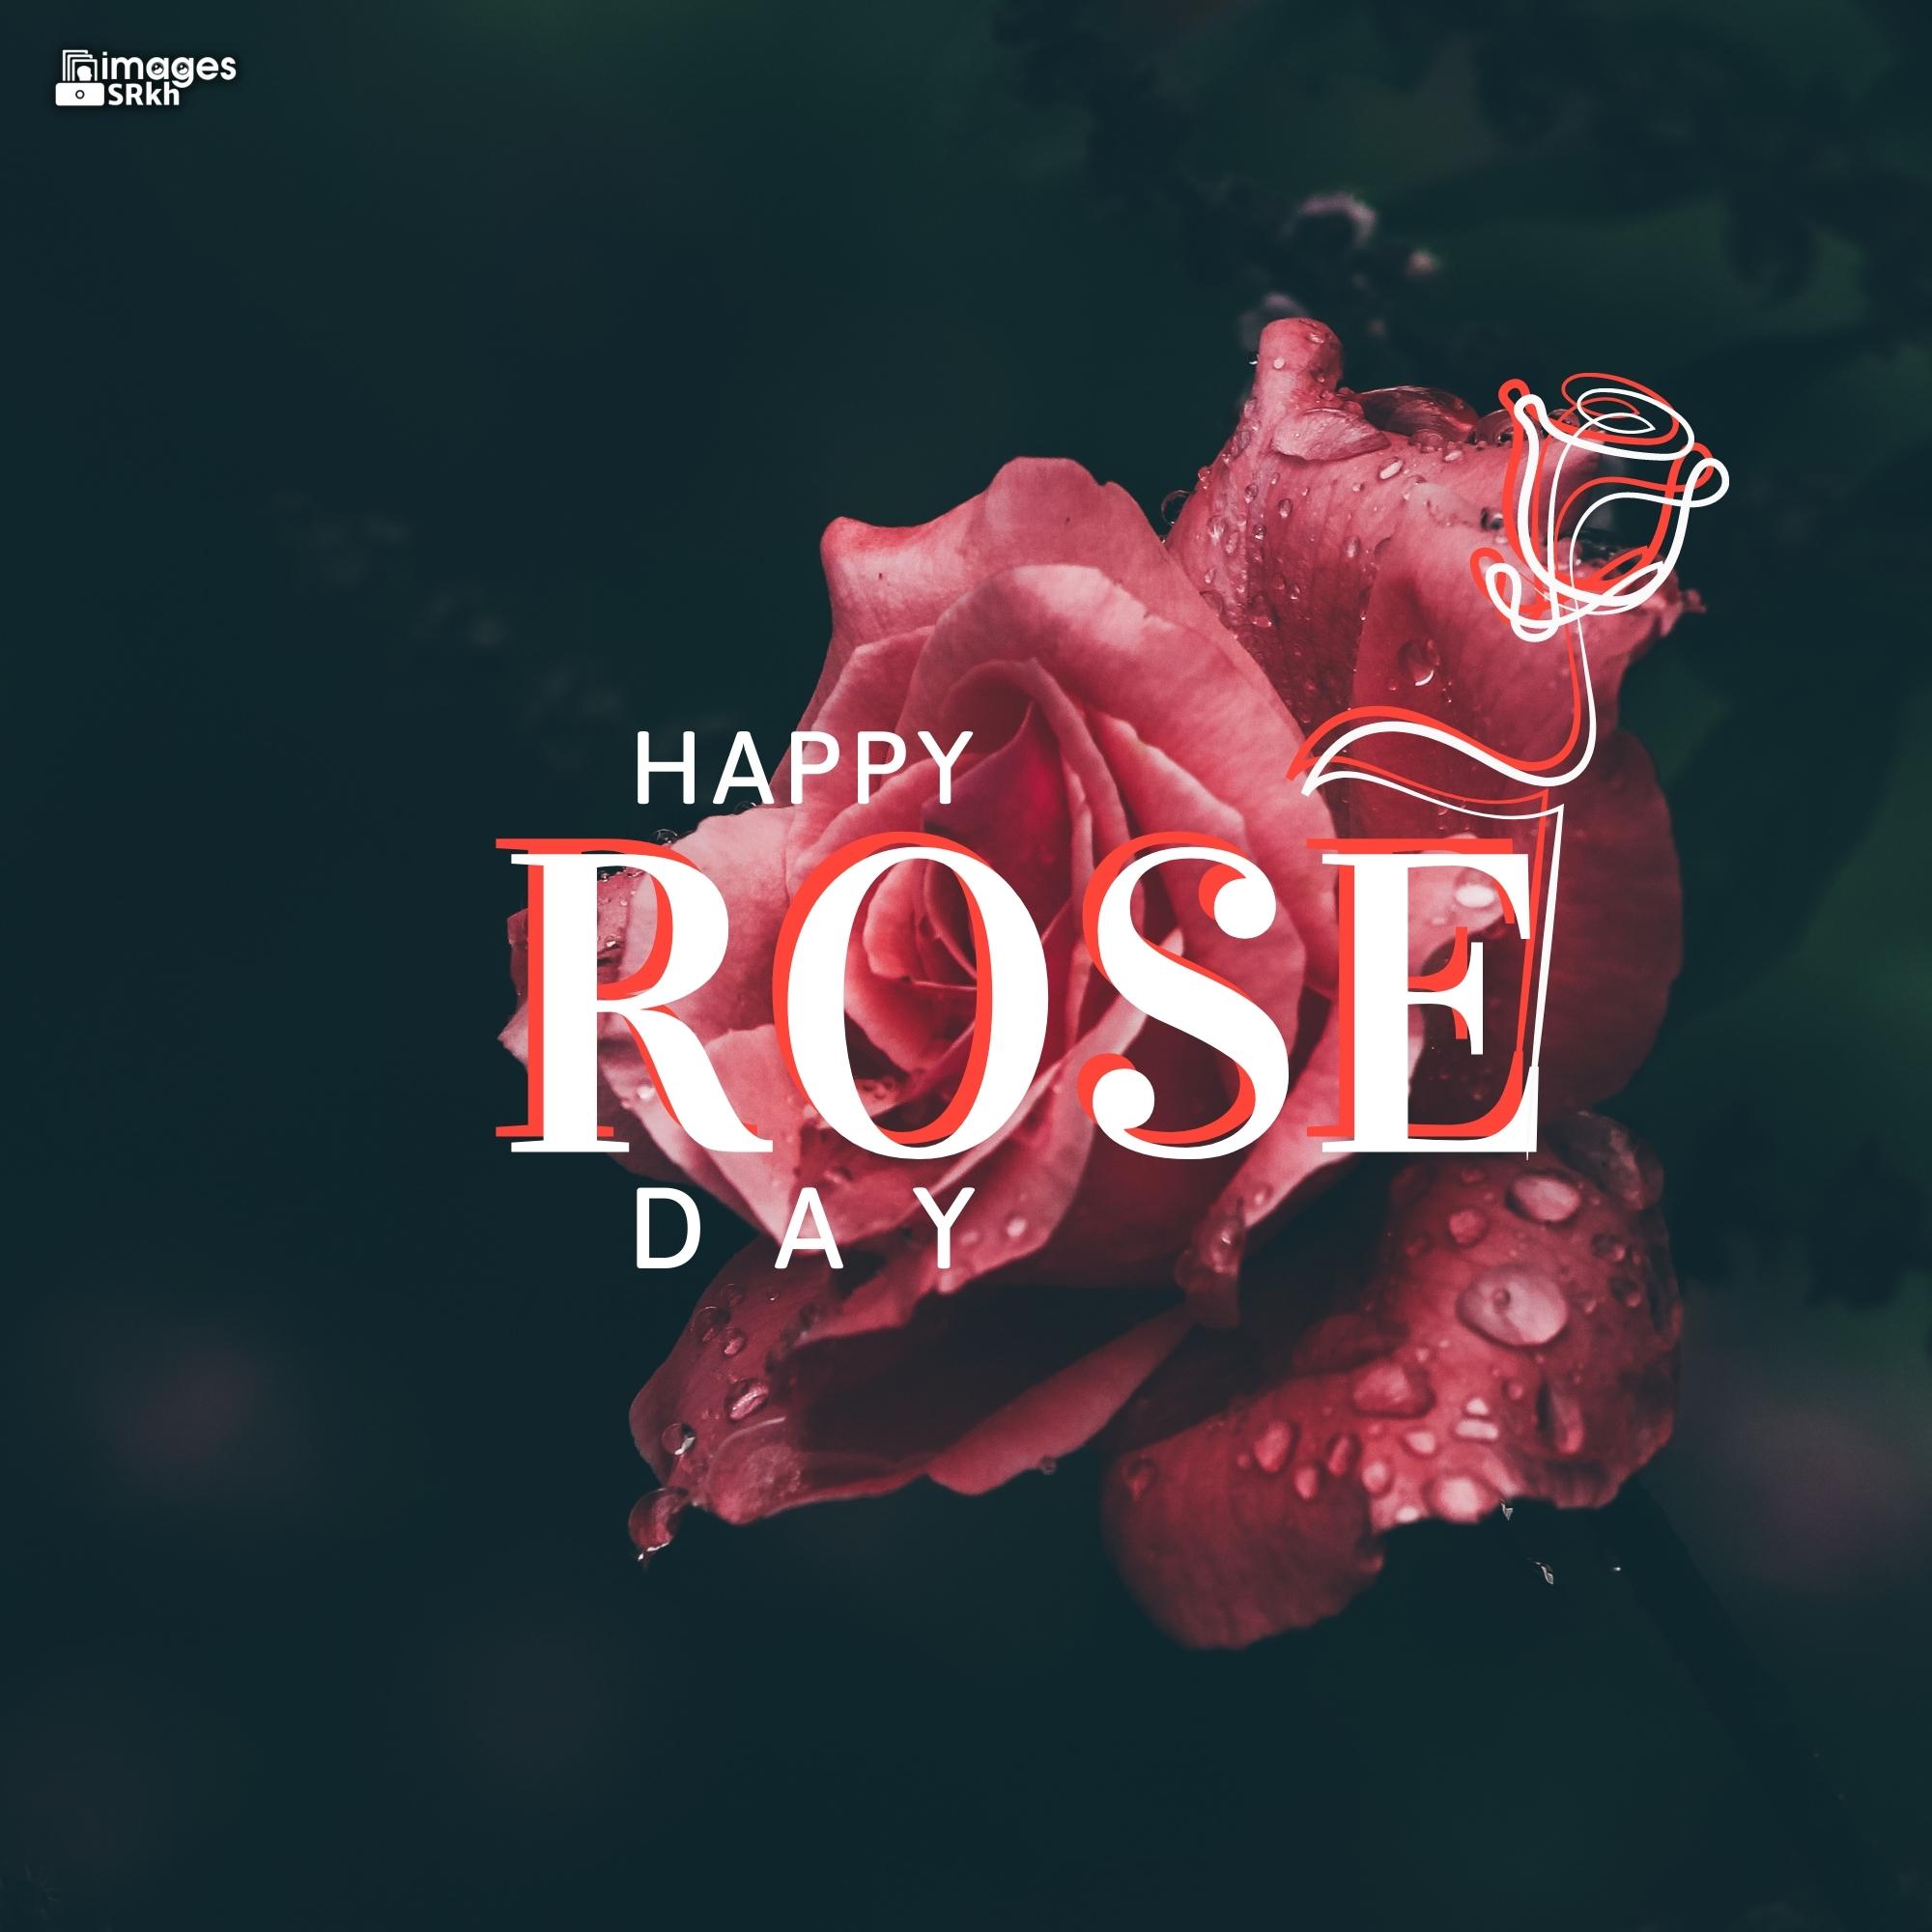 Happy Rose Day Image Hd Download (100)